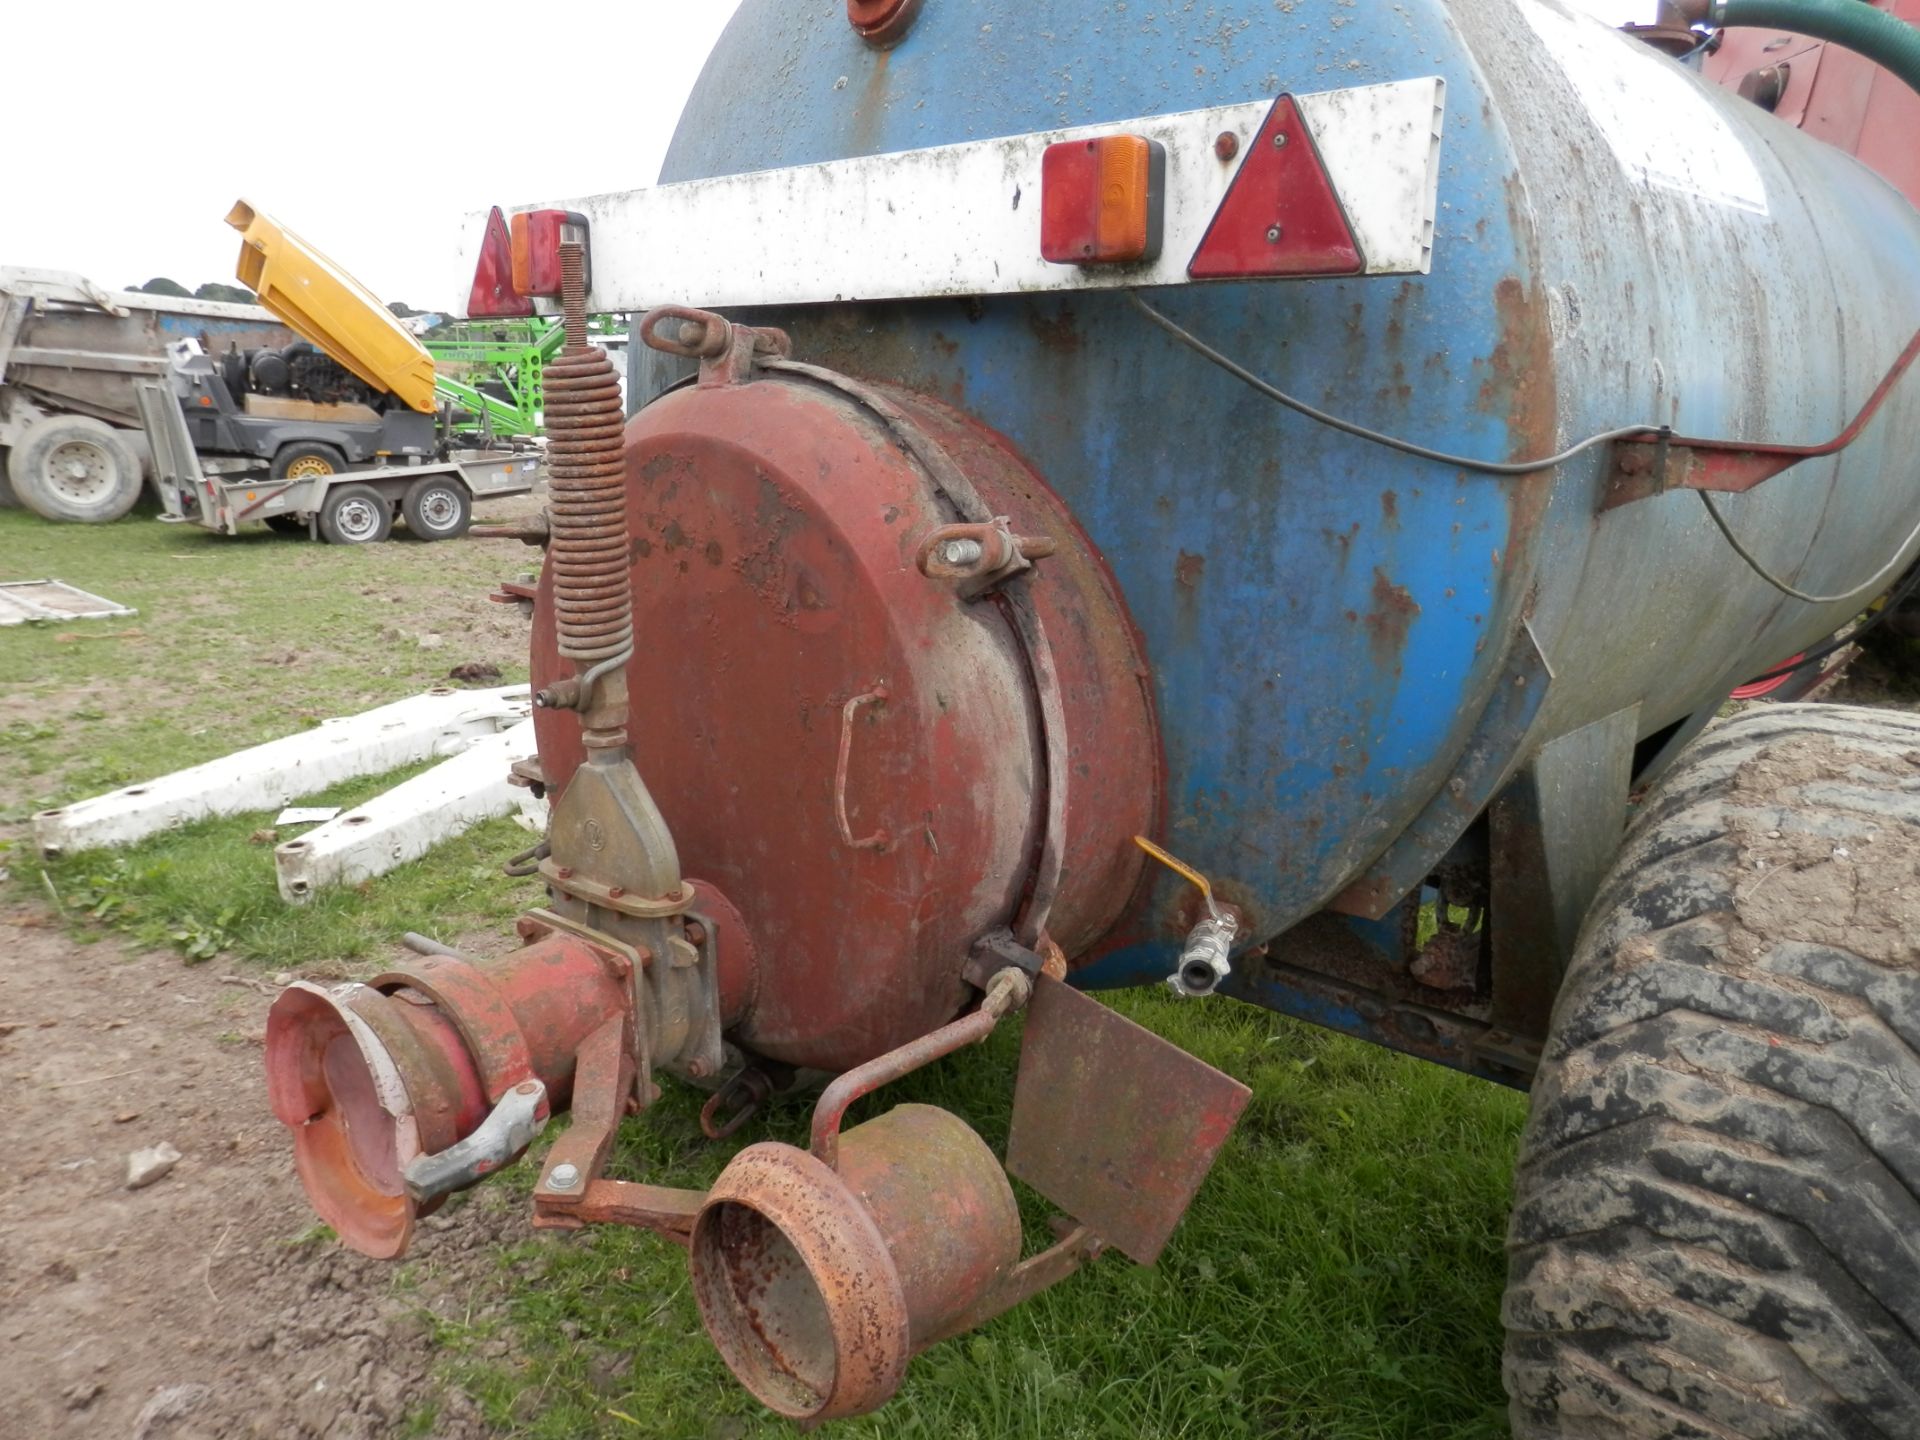 TANCO 900 AGRICULTURAL SLURRY/WATER BOWSER. NO PUMP ! 900 GALLON CAPACITY. - Image 2 of 7